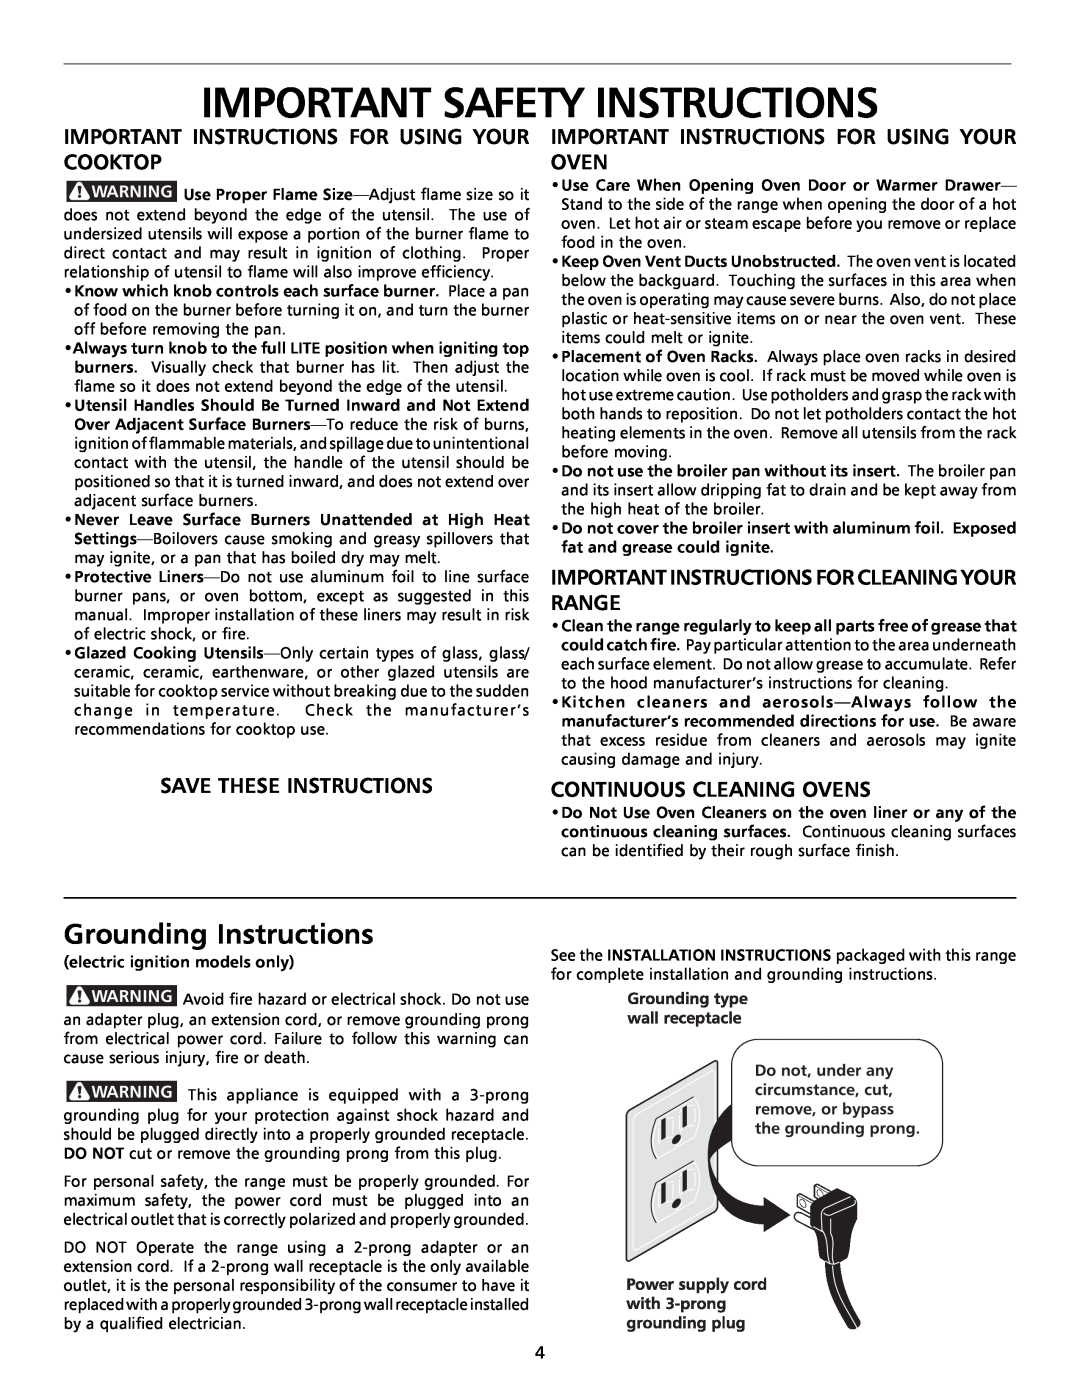 Frigidaire 316000291 (9902) Grounding Instructions, Important Instructions For Using Your Cooktop, Save These Instructions 